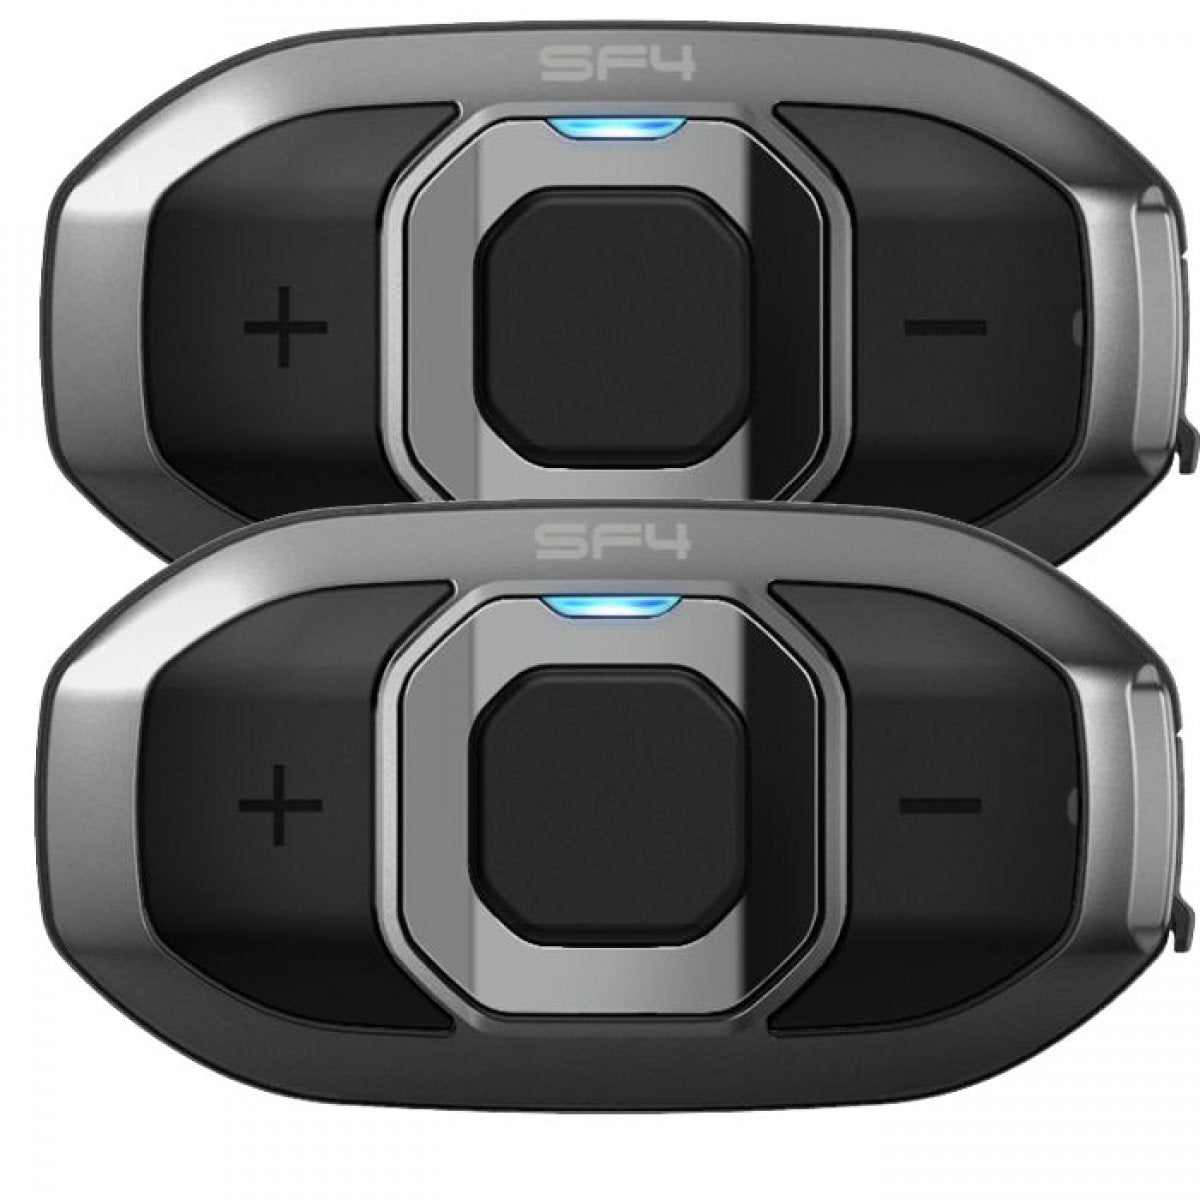 Sena  SF4-02D Motorcycle Bluetooth Communication System With Dual Speakers, Dual Pack